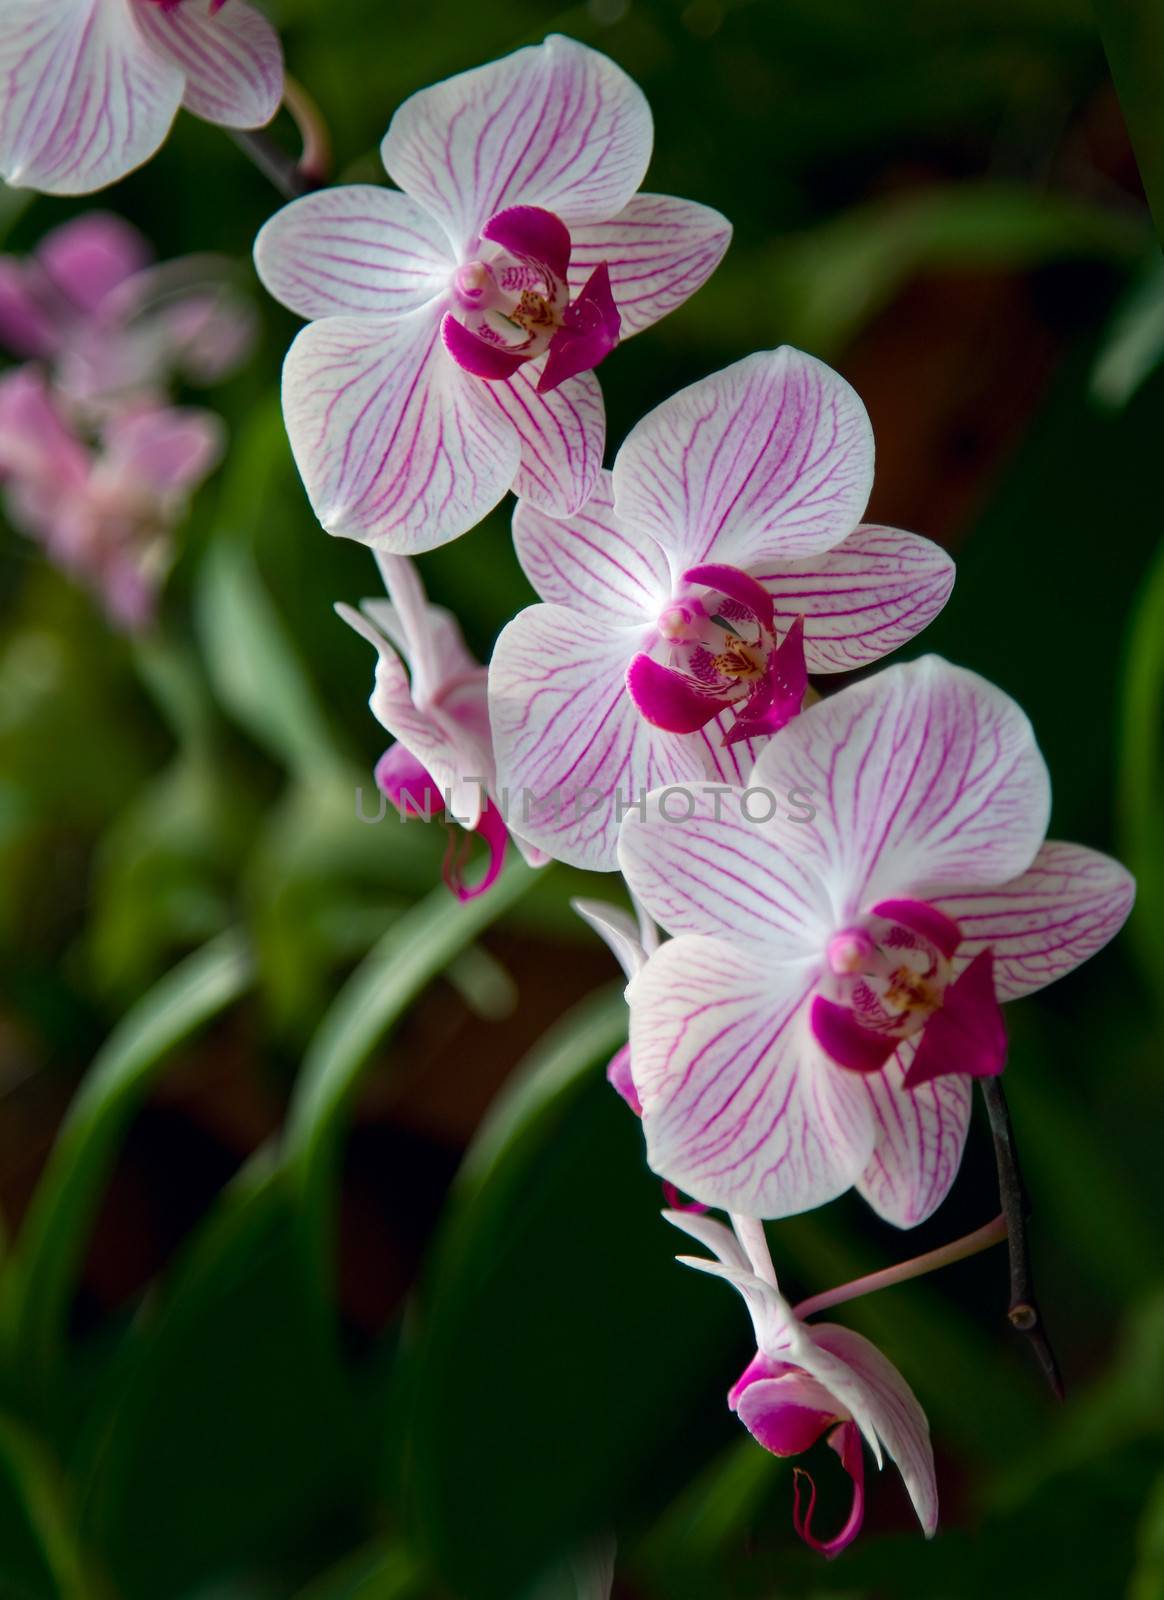 Orchid Flowers  by foryouinf